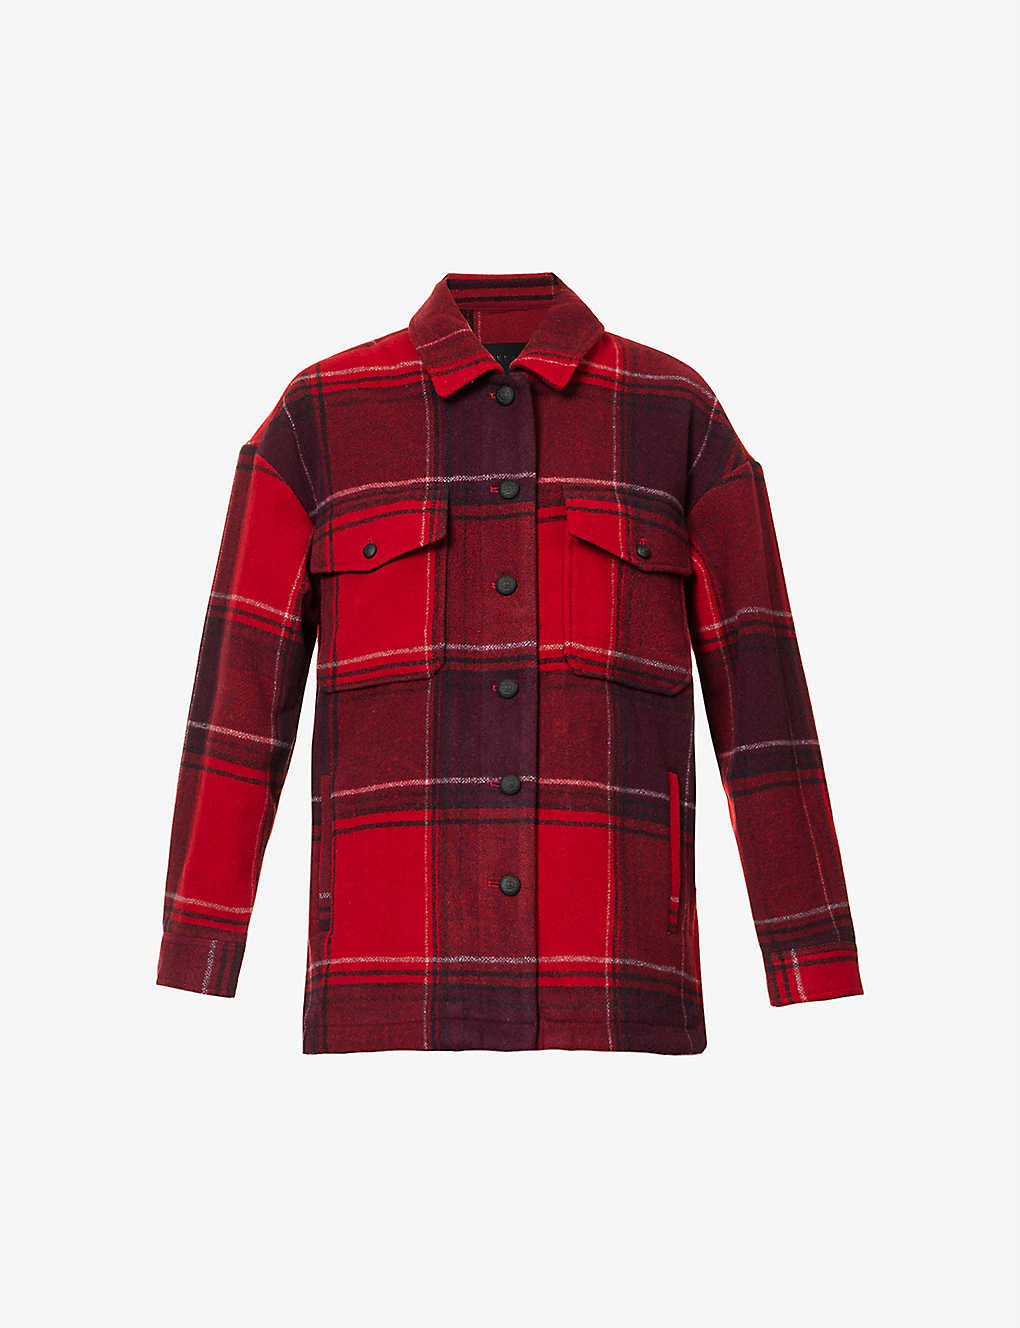 Ikks Womens Red Checked Wool-blend Jacket